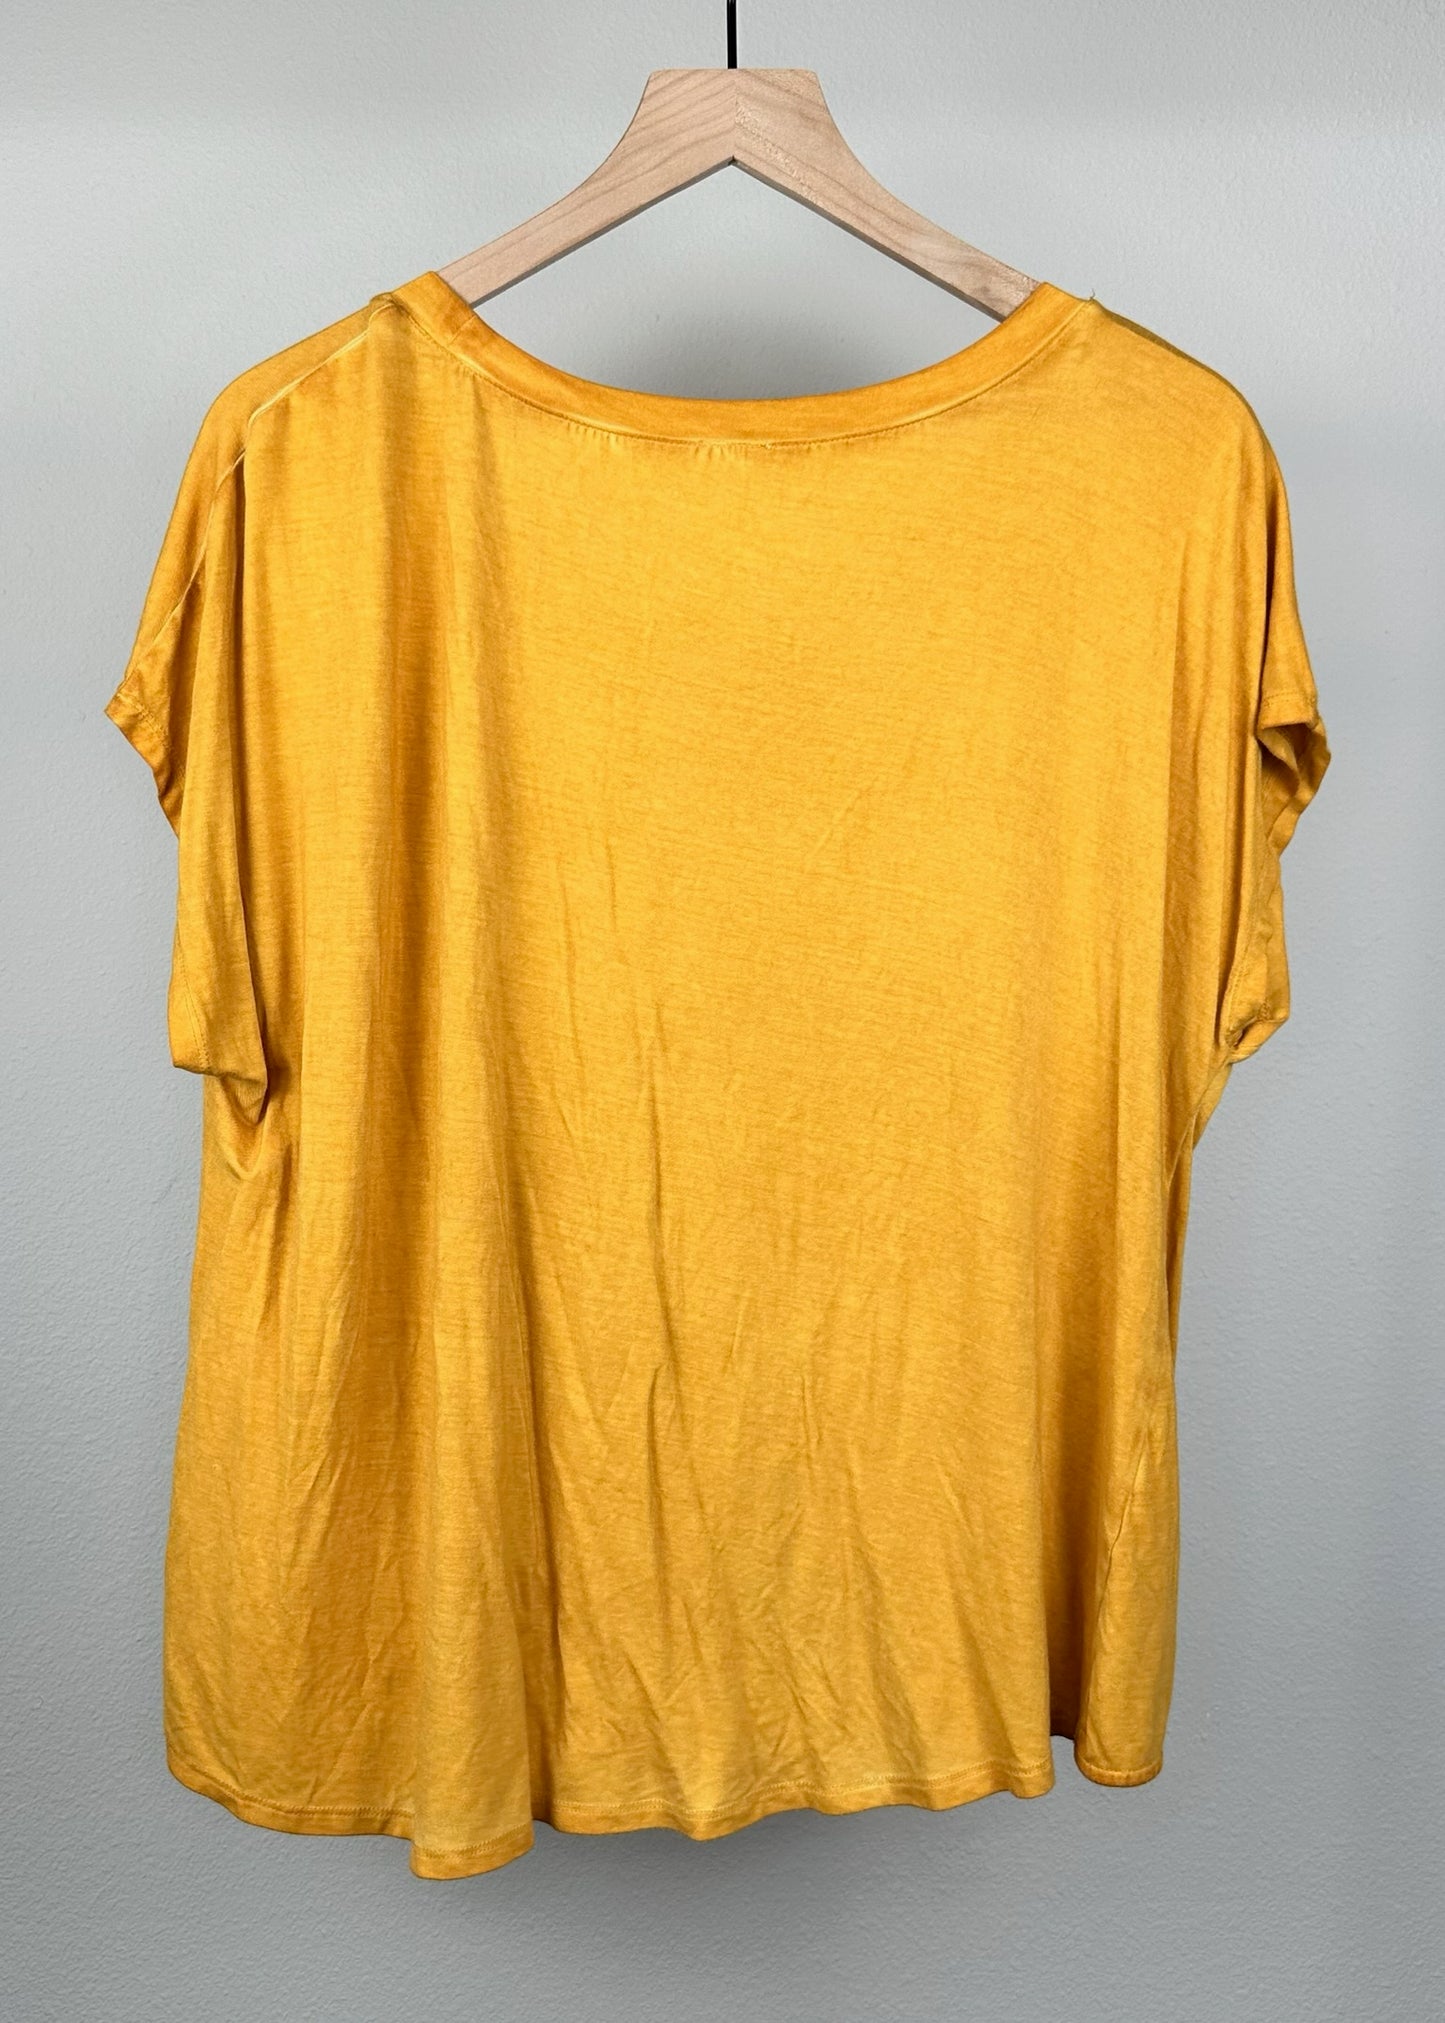 Gold Shirt by Cable & Gauge